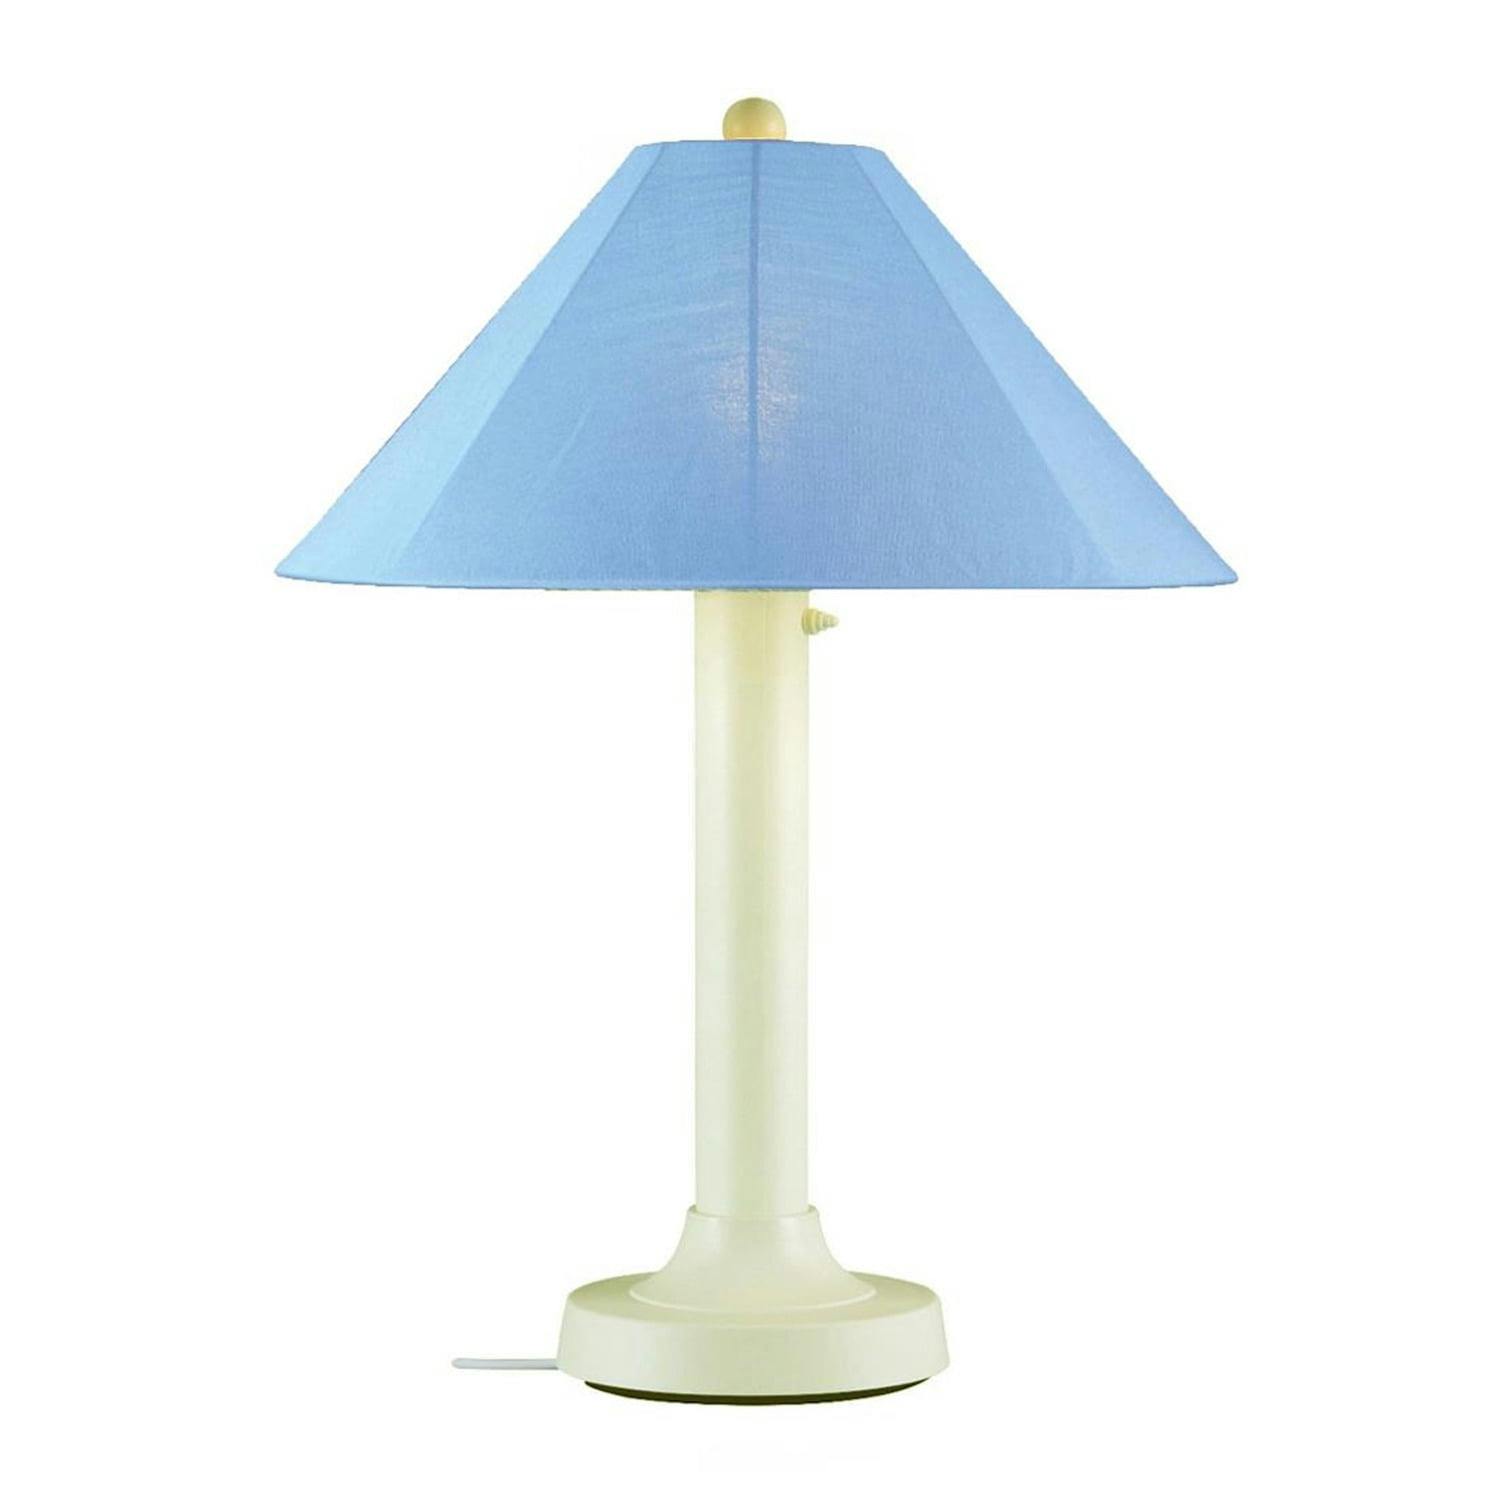 Elegant Bisque Outdoor Table Lamp with Sky Blue Shade